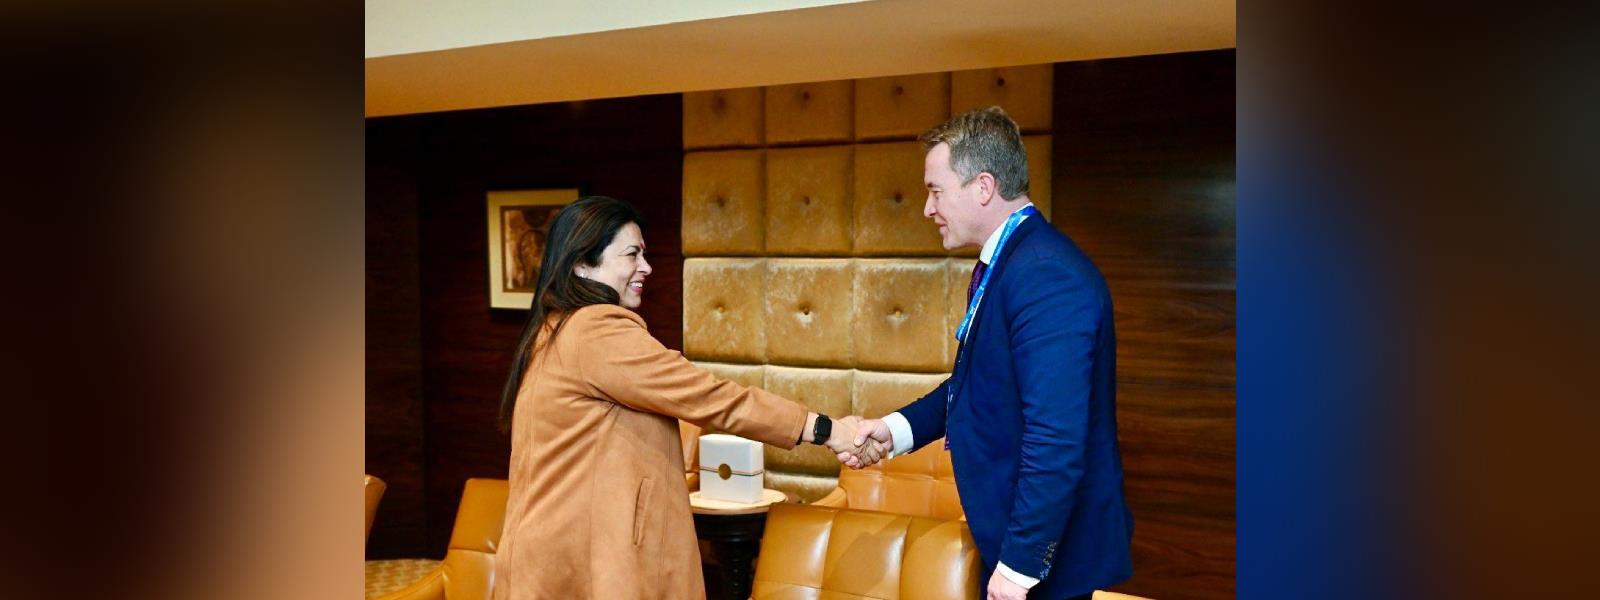 Minister of State for External Affairs Smt. Meenakashi Lekhi met H.E. Mr. Andreas Motzfeldt Kravik, Deputy Foreign Minister of Norway on the sidelines of Raisina Dialogue 2024 in New Delhi